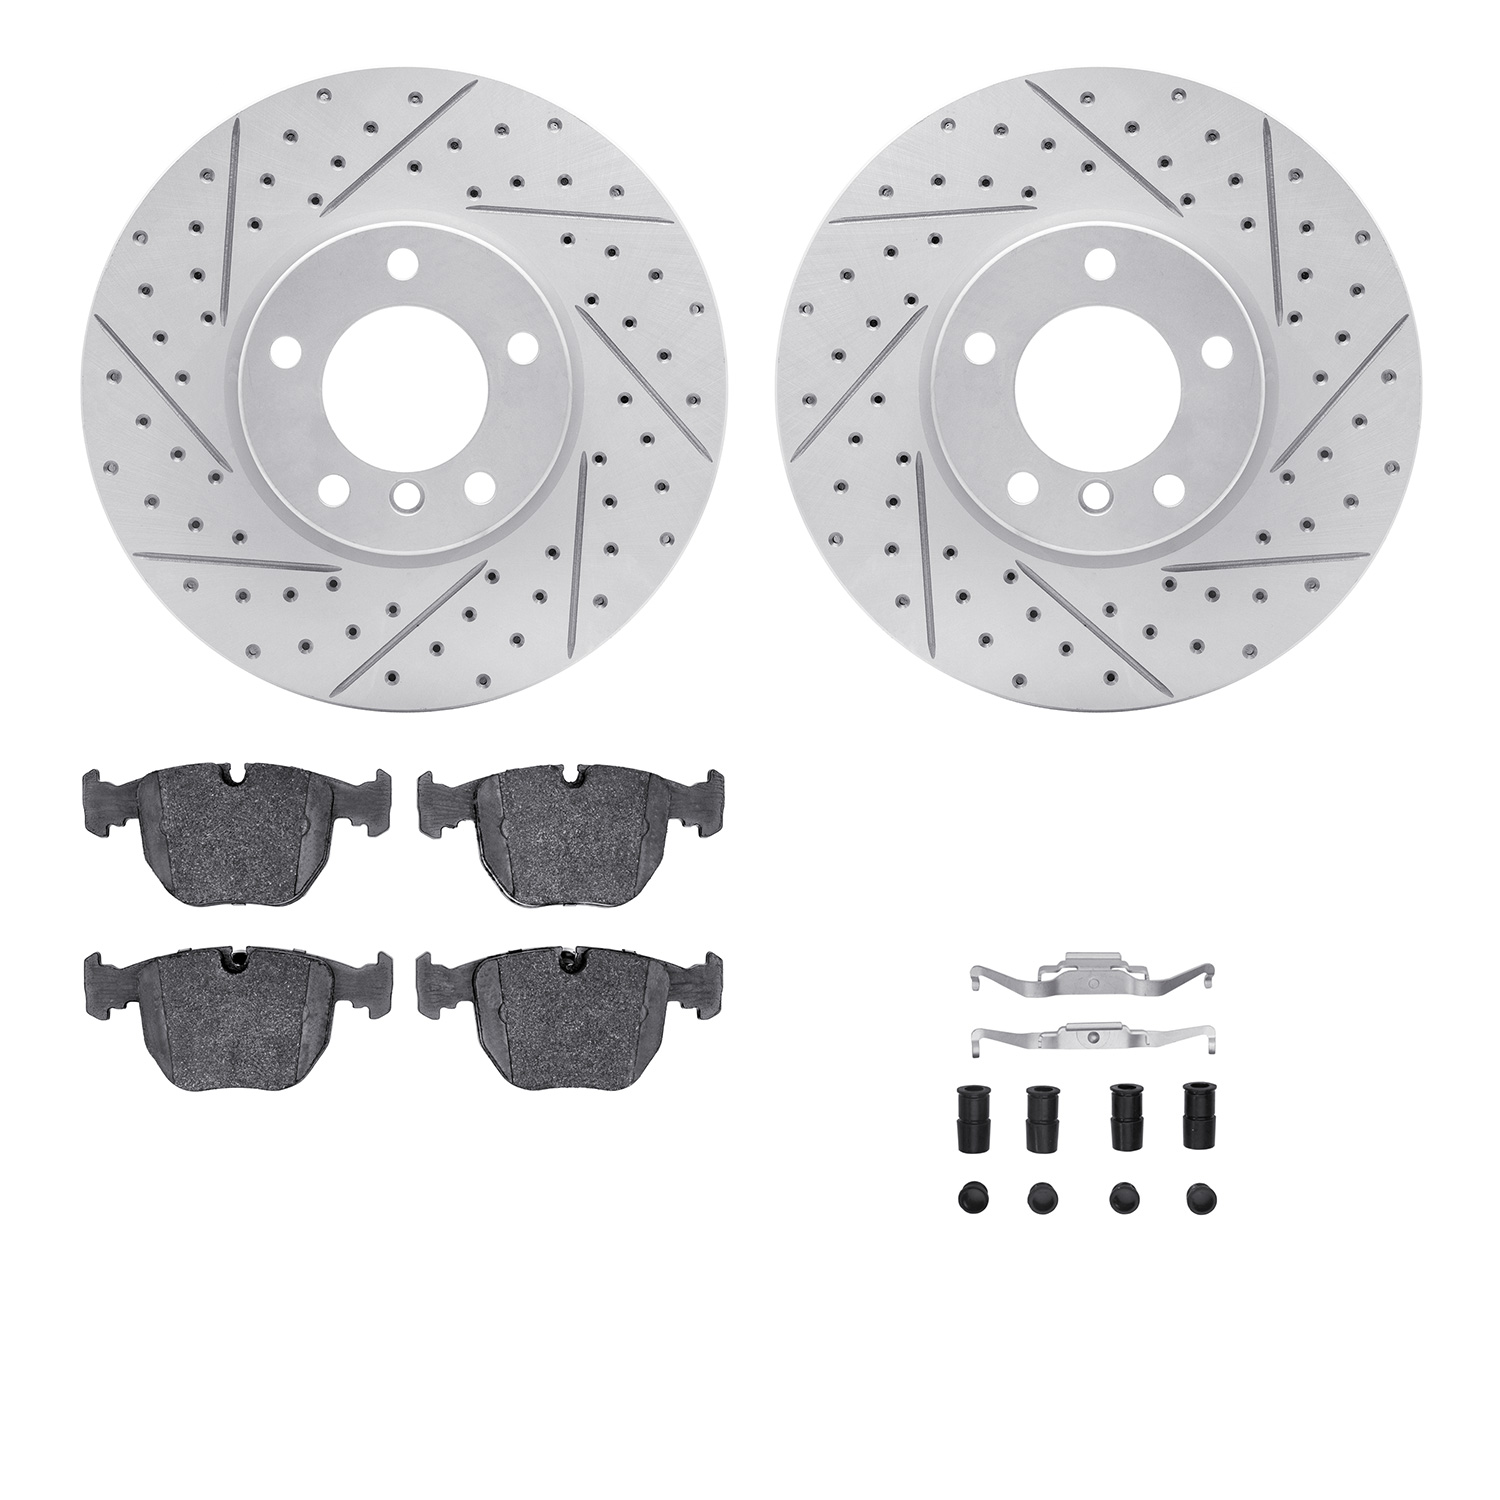 2512-31029 Geoperformance Drilled/Slotted Rotors w/5000 Advanced Brake Pads Kit & Hardware, 2000-2003 BMW, Position: Front